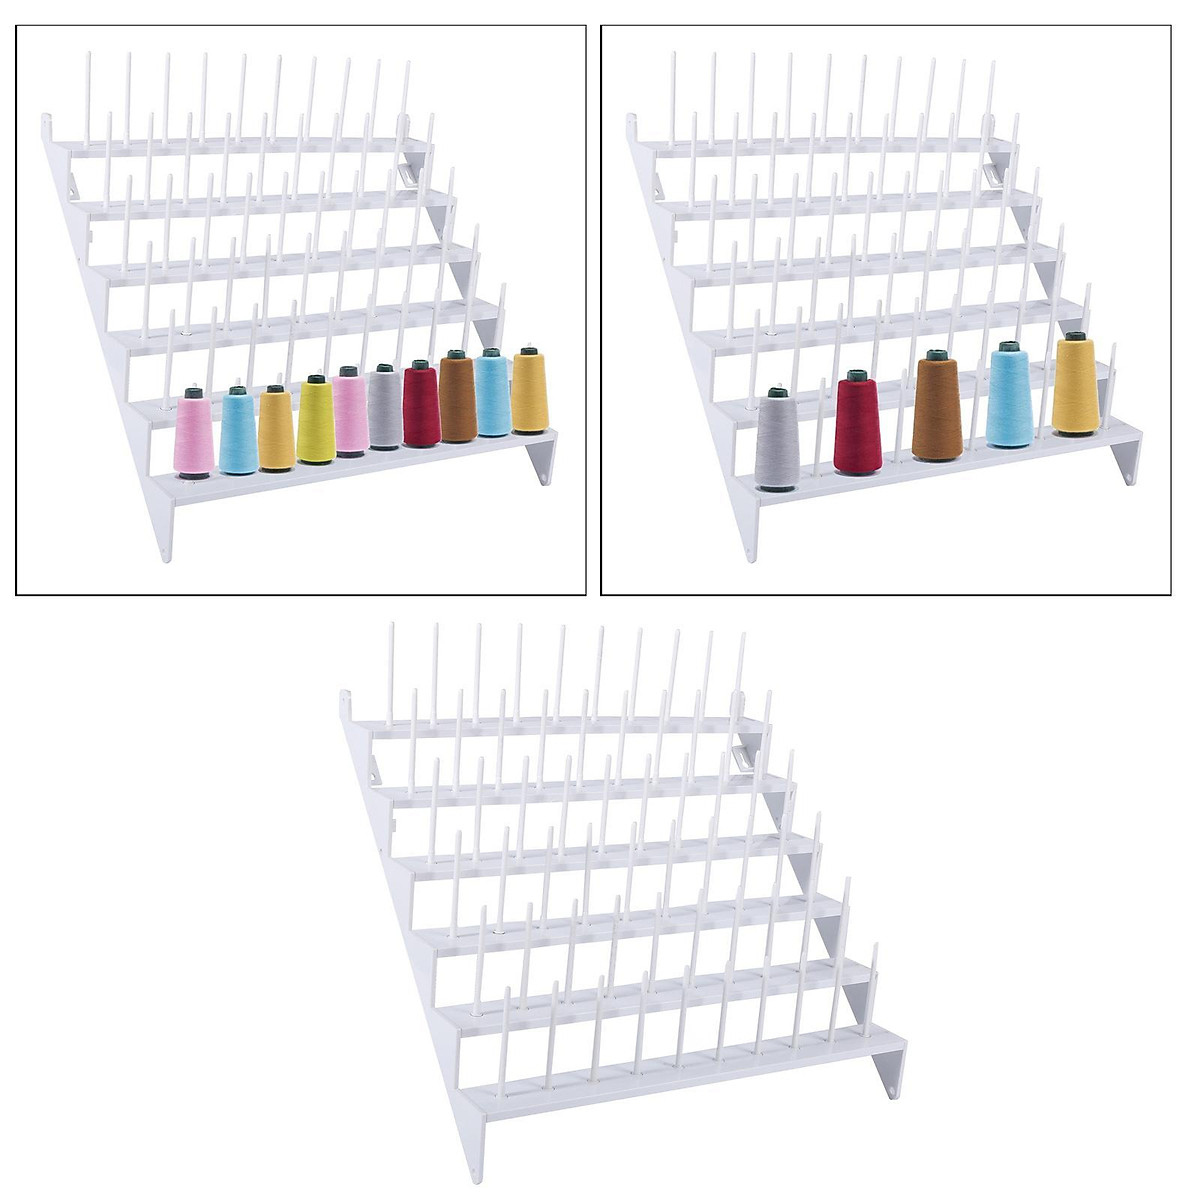 Embroidex 60 Spool Cone Thread Stand/Rack Organizer for Sewing and Embroidery